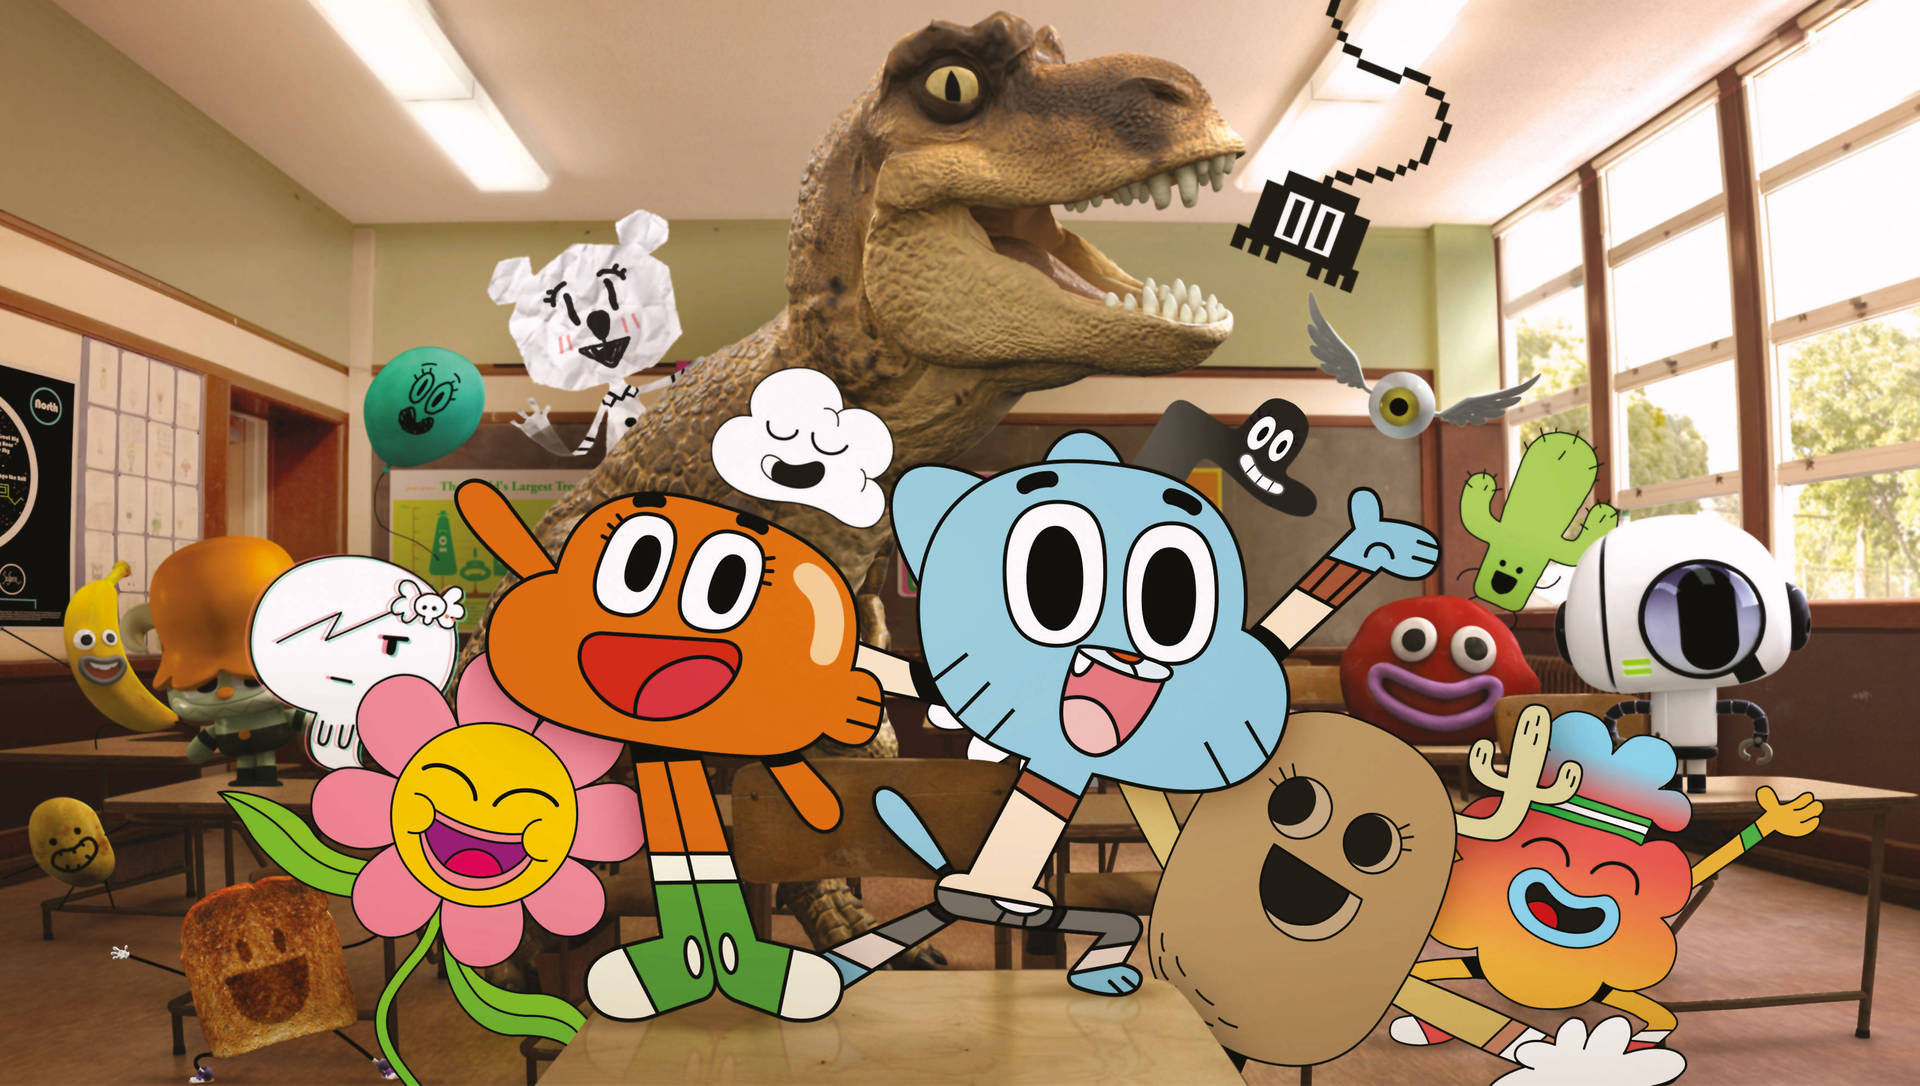 Gumball Friends In Classroom